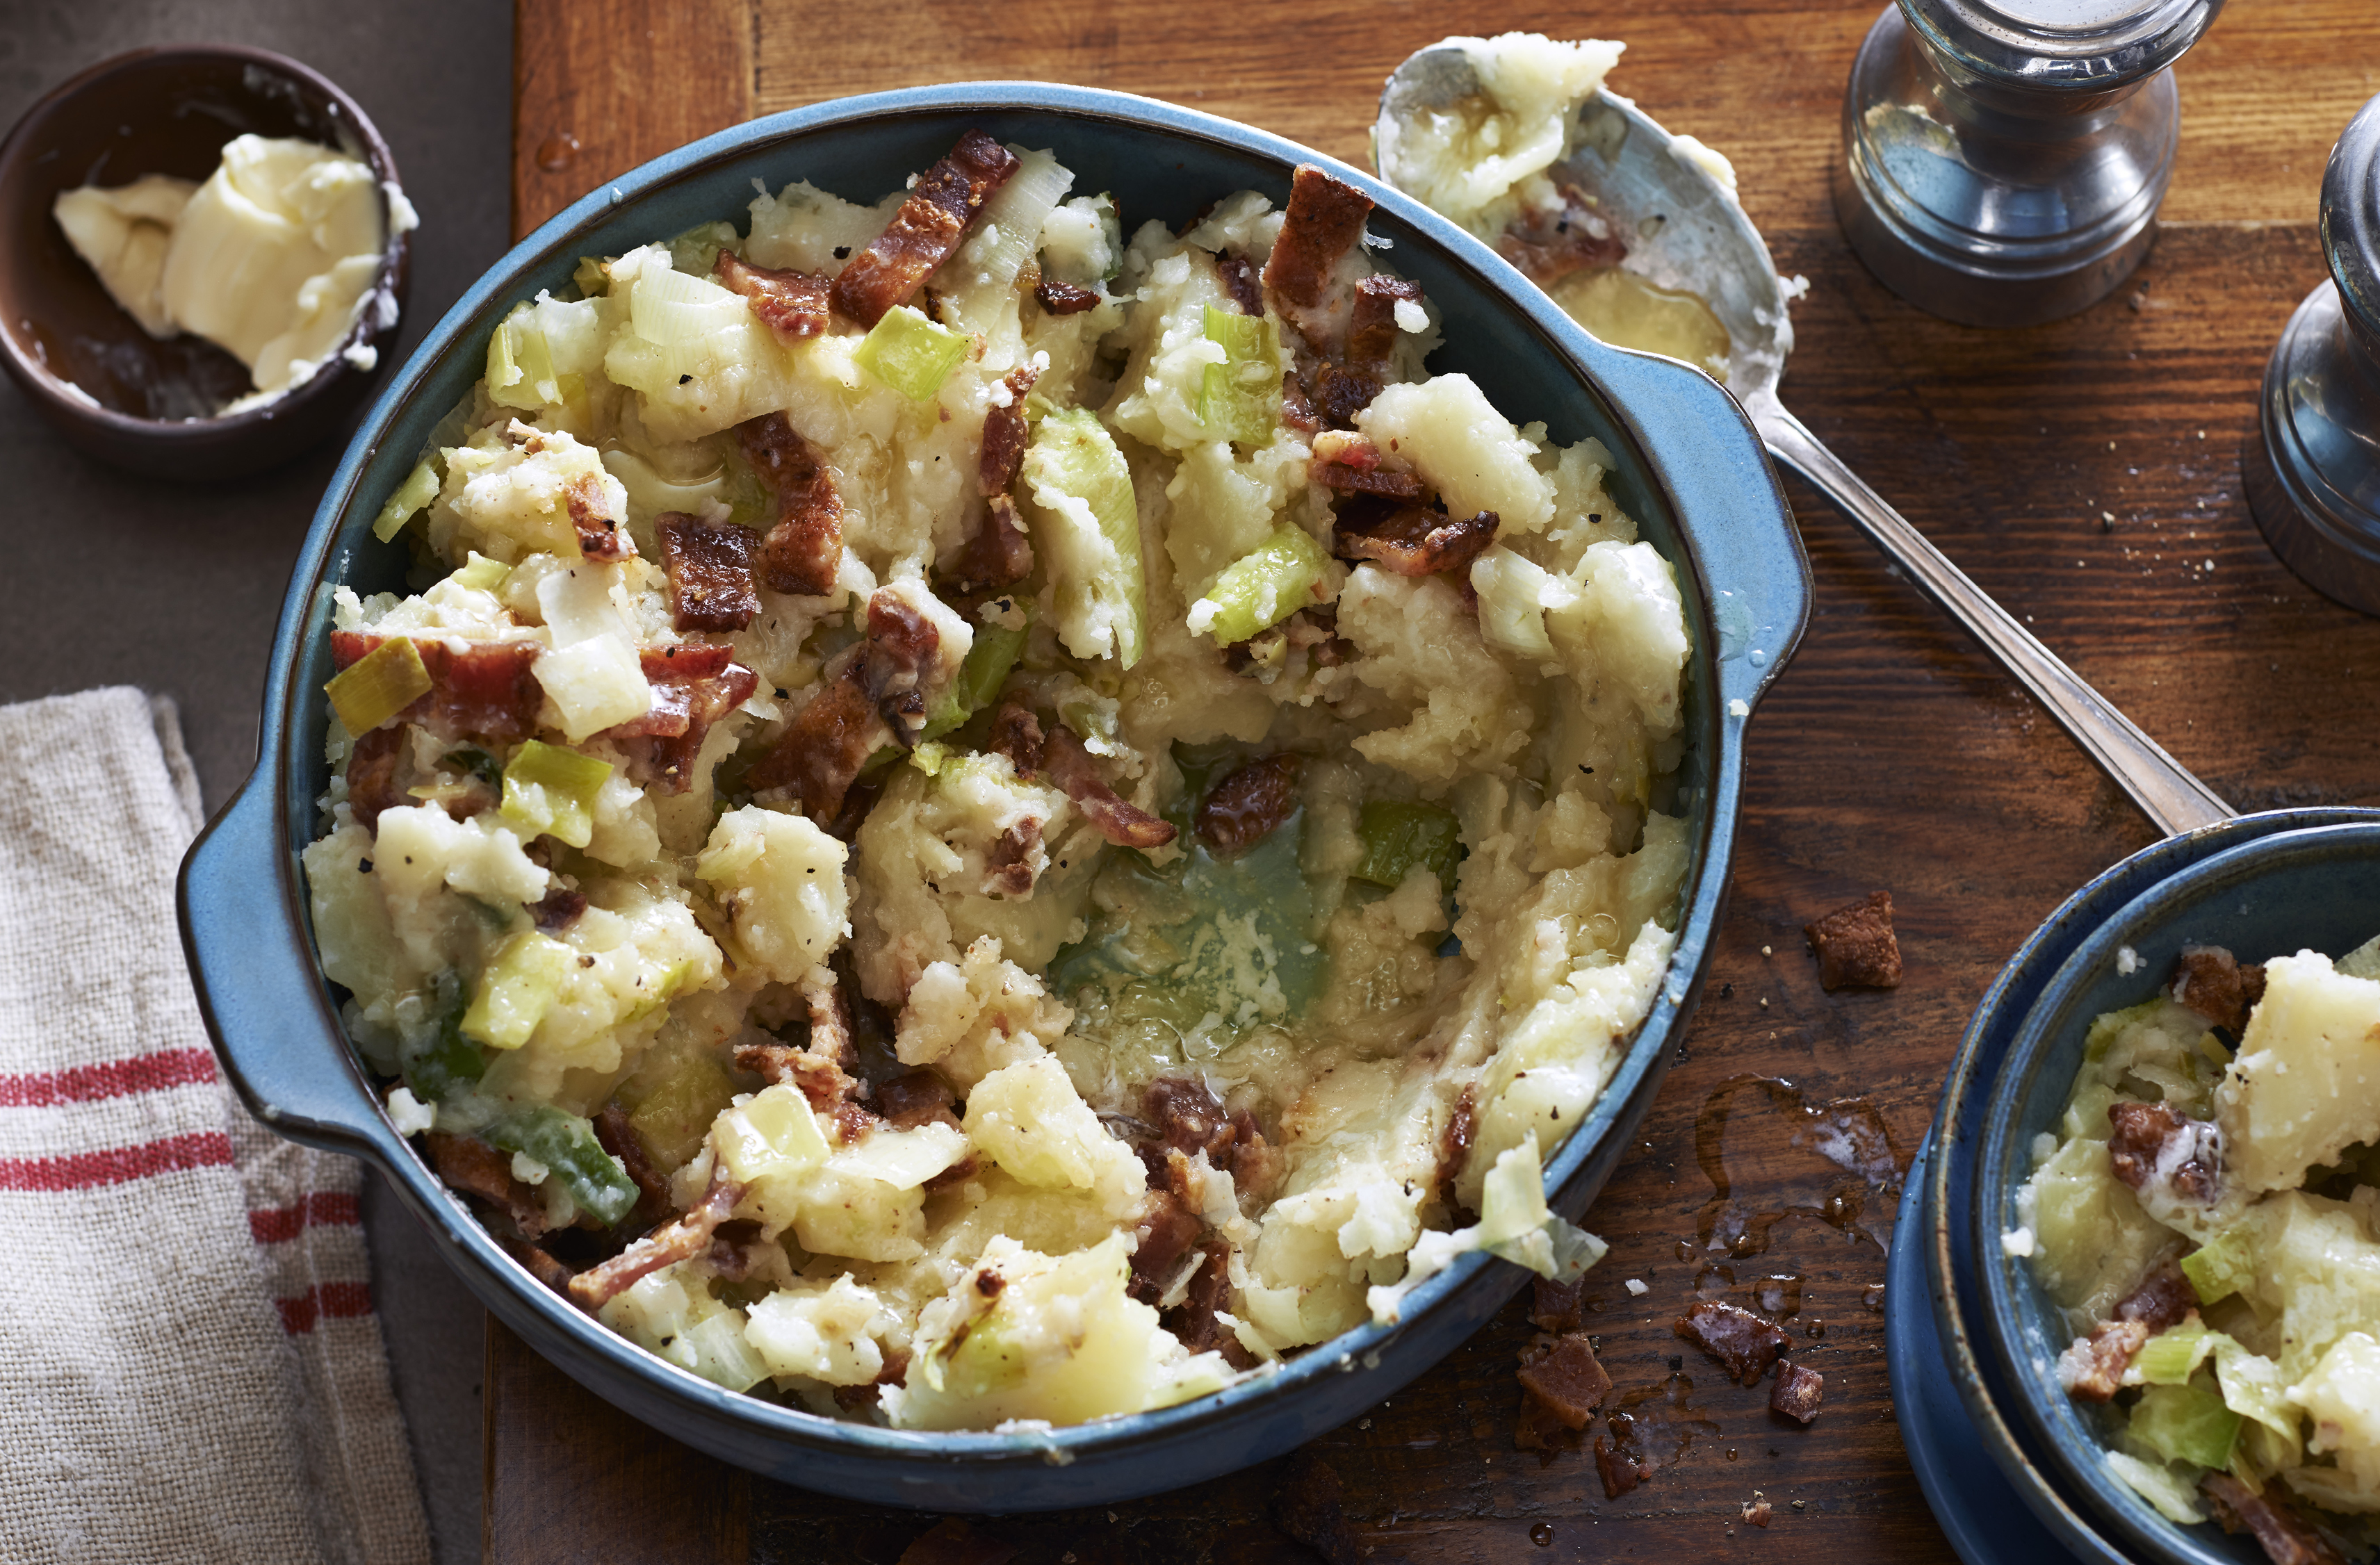 Mashed potatoes recipe mixed with leek and bacon.  Placed in a ceramic serving bowl.  Small butter dish on the side to place on top.